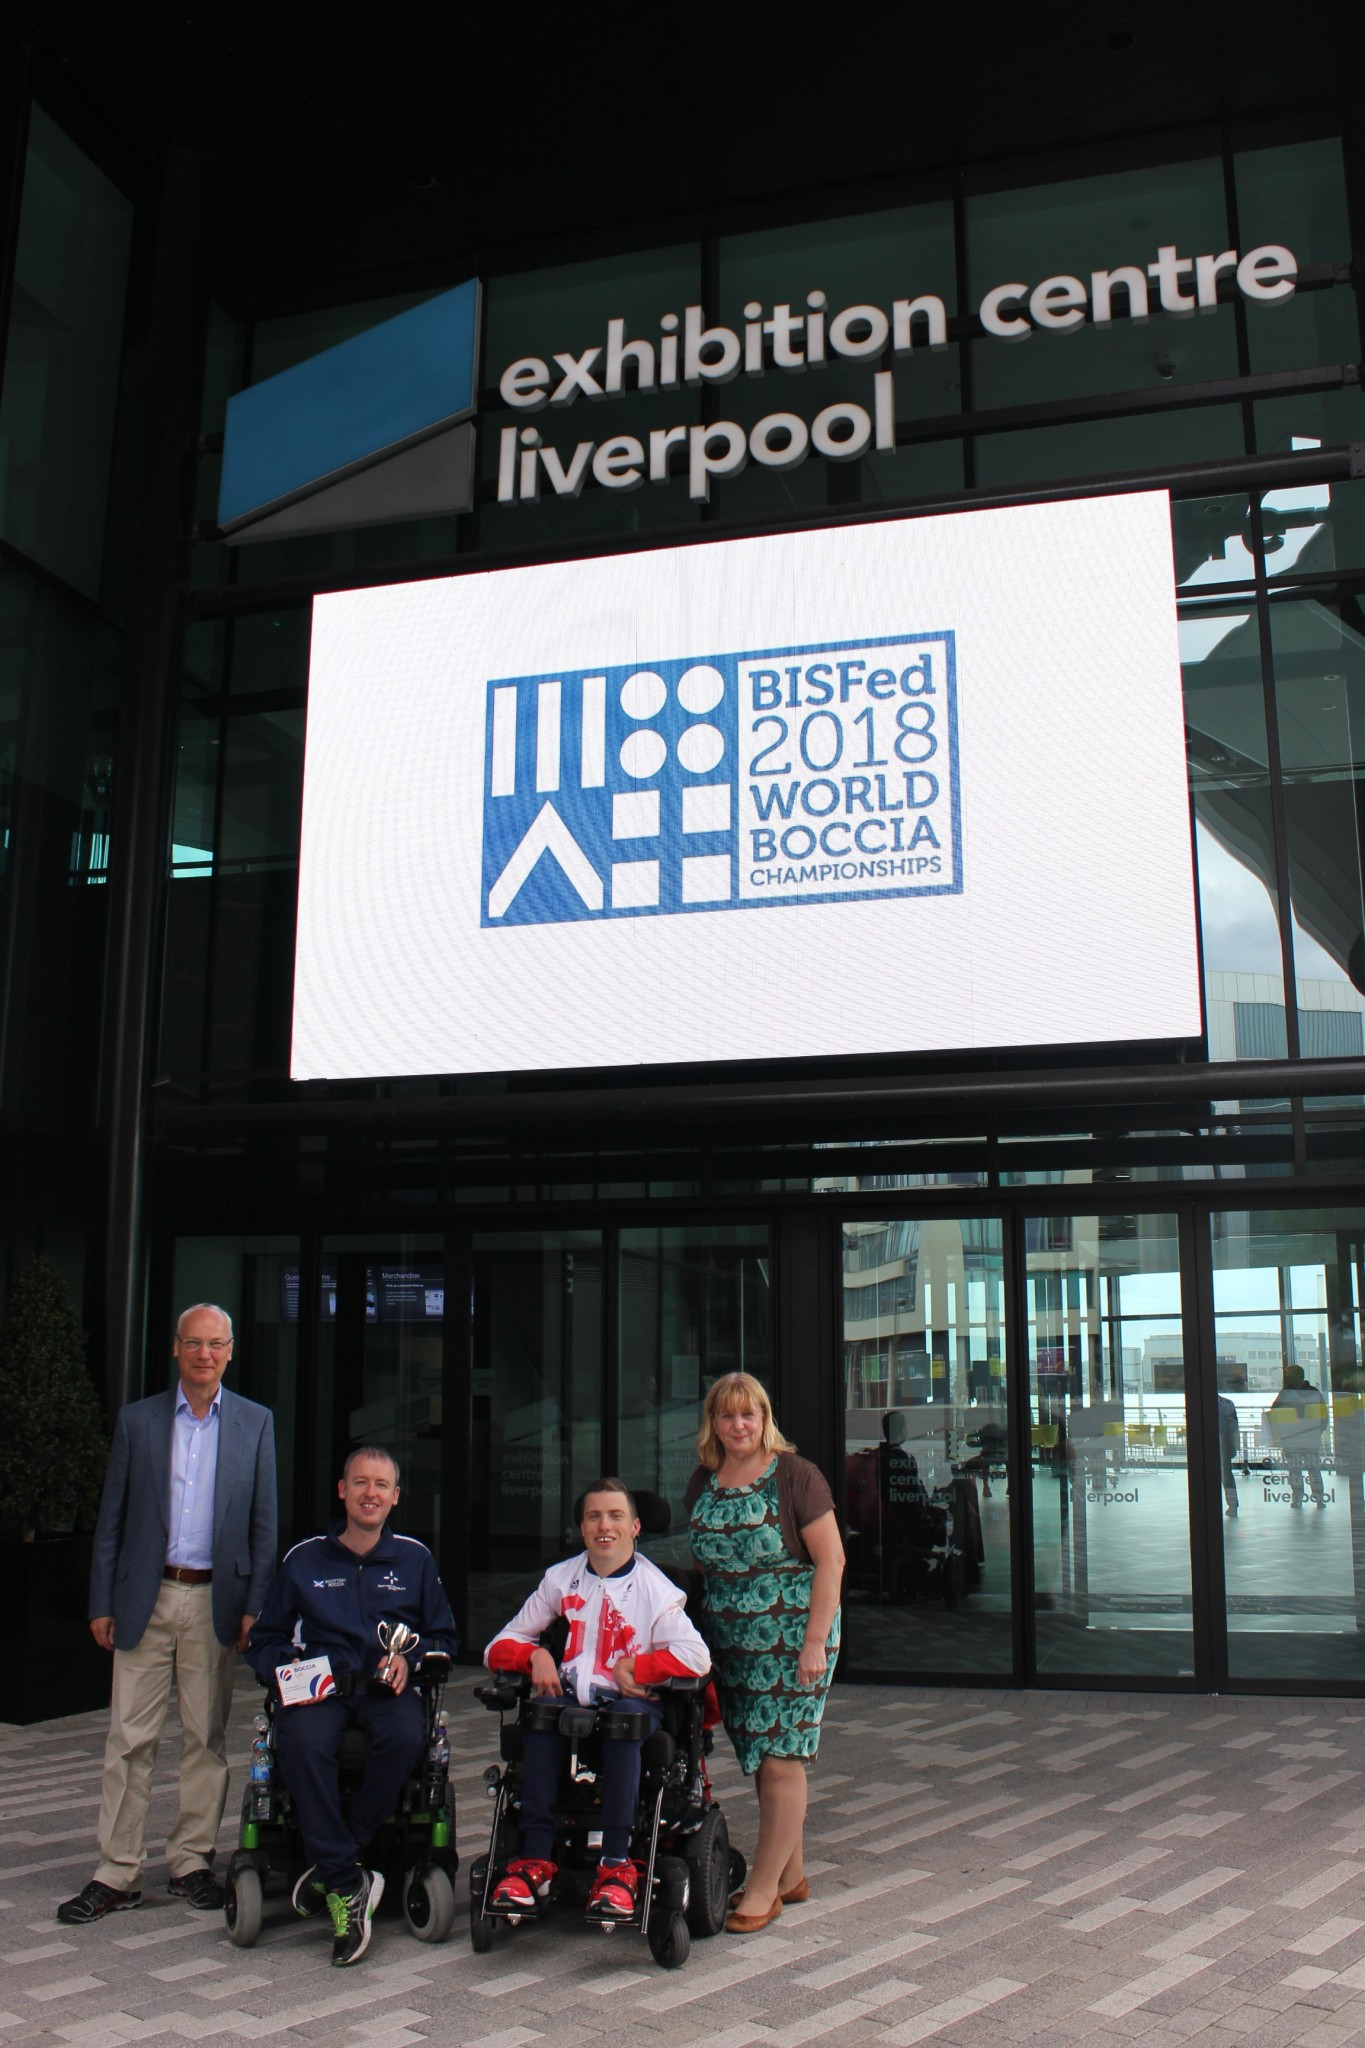 Left to right: John Dowson, Stephen McGuire, David Smith and Wendy Simon at the logo launch in Liverpool ©BISFed